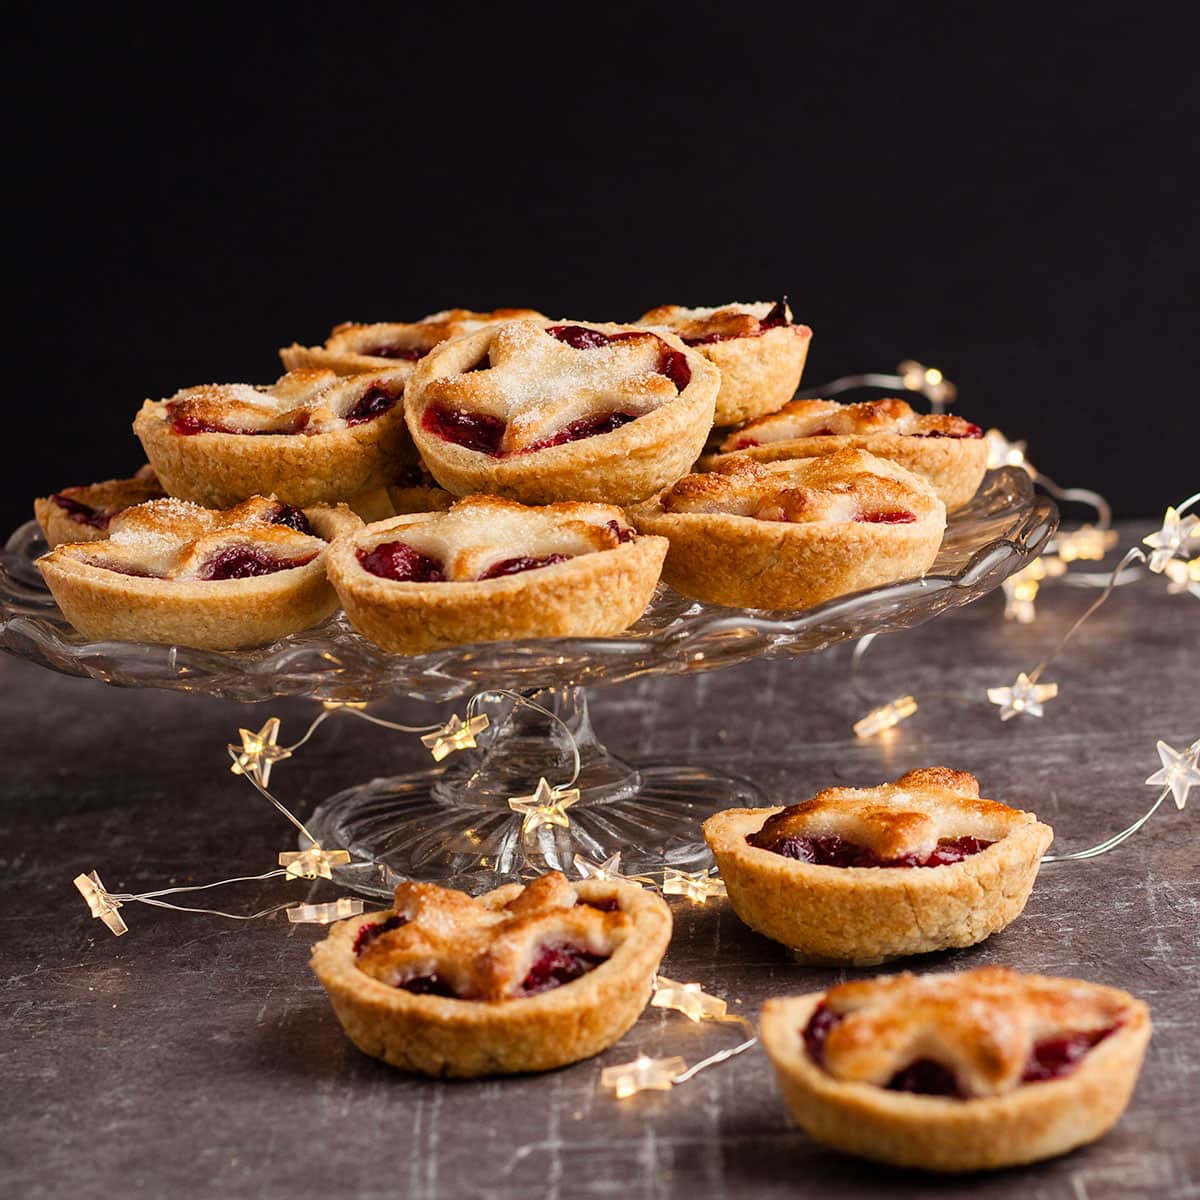 Cranberry and marzipan pies on a cake stand.